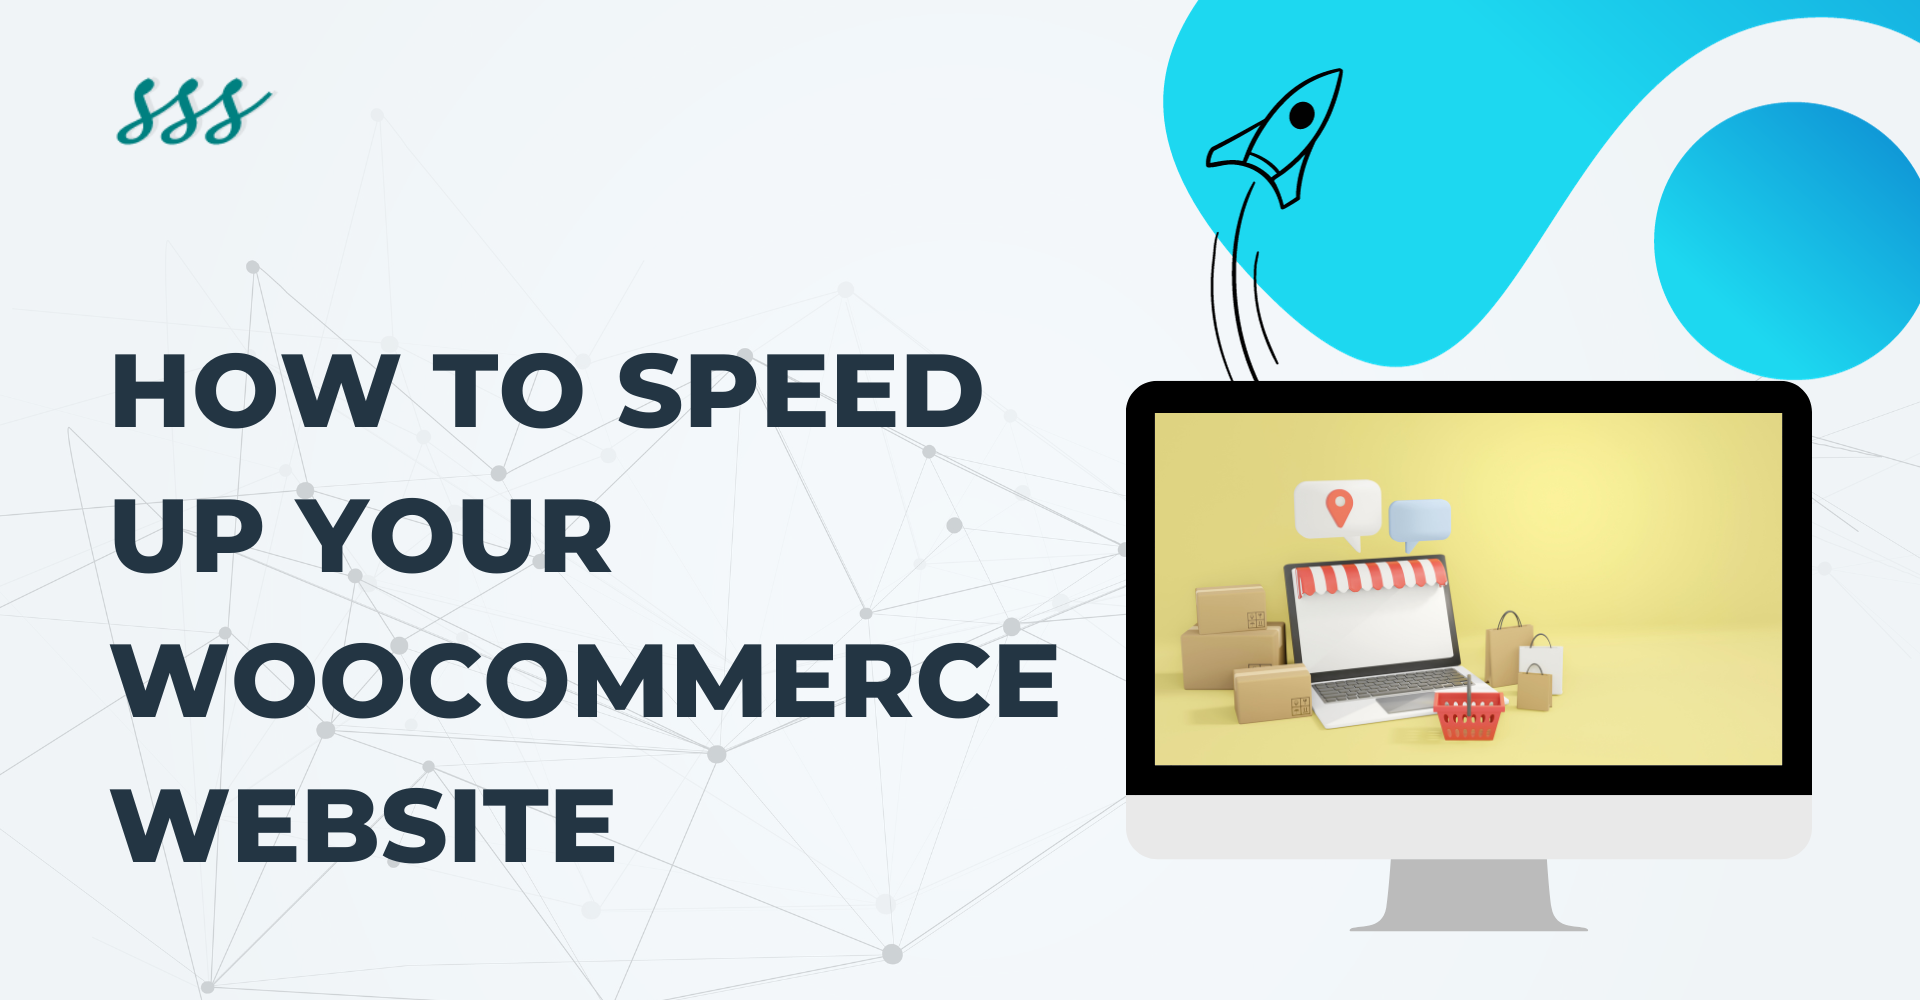 How to Speed Up Your WooCommerce Website